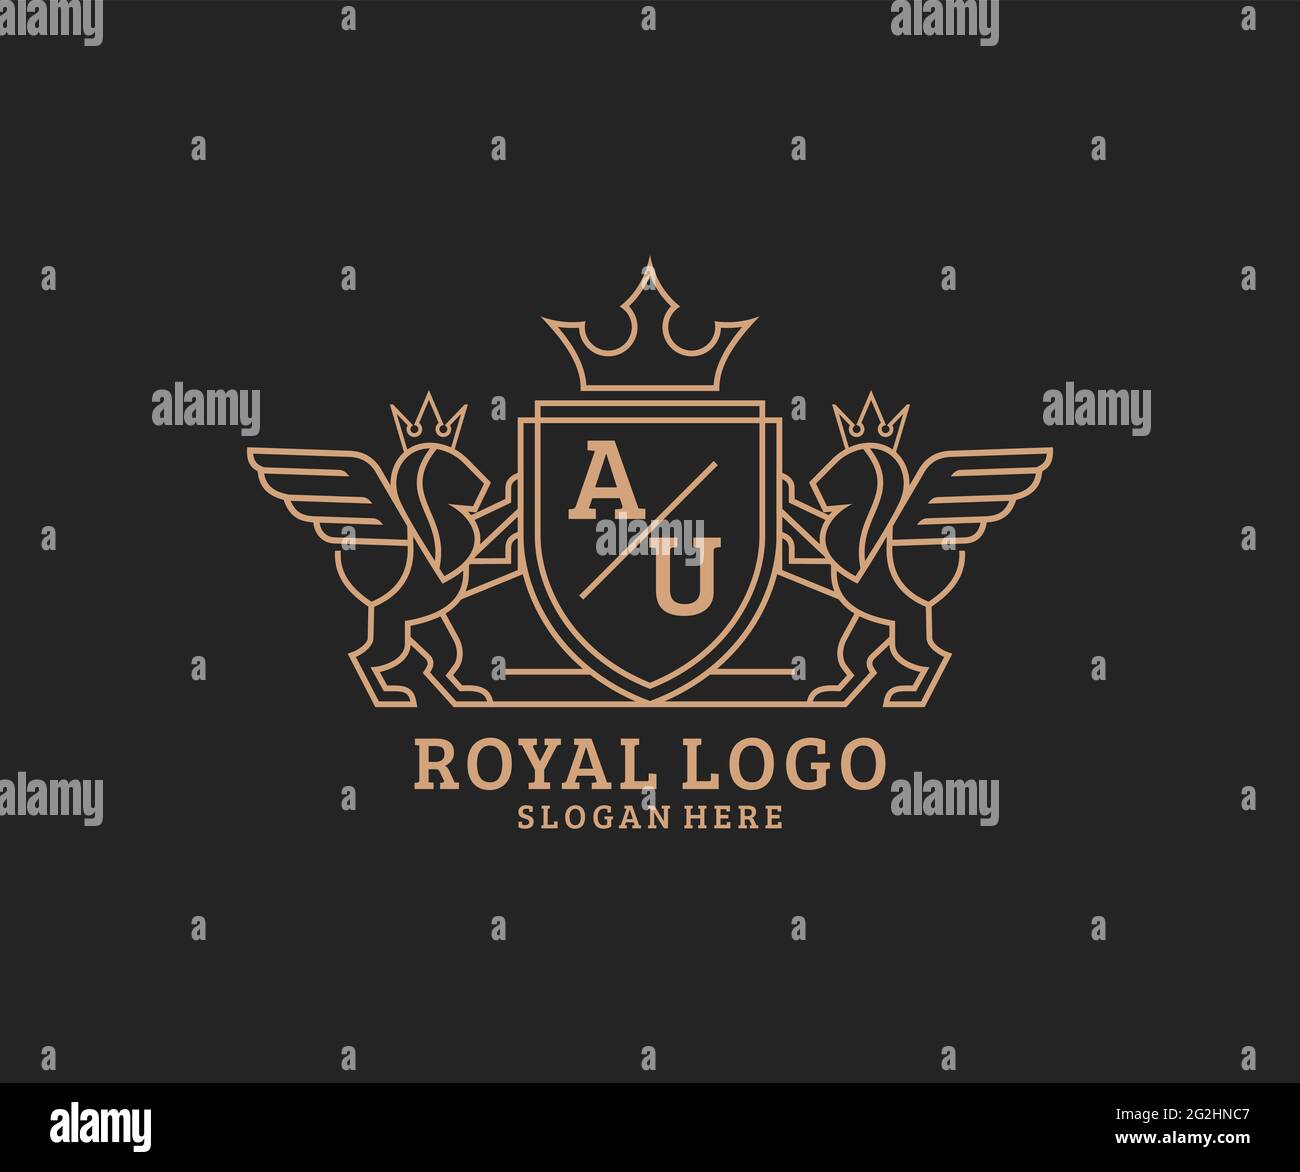 AU Letter Lion Royal Luxury Heraldic,Crest Logo template in vector art for Restaurant, Royalty, Boutique, Cafe, Hotel, Heraldic, Jewelry, Fashion and Stock Vector